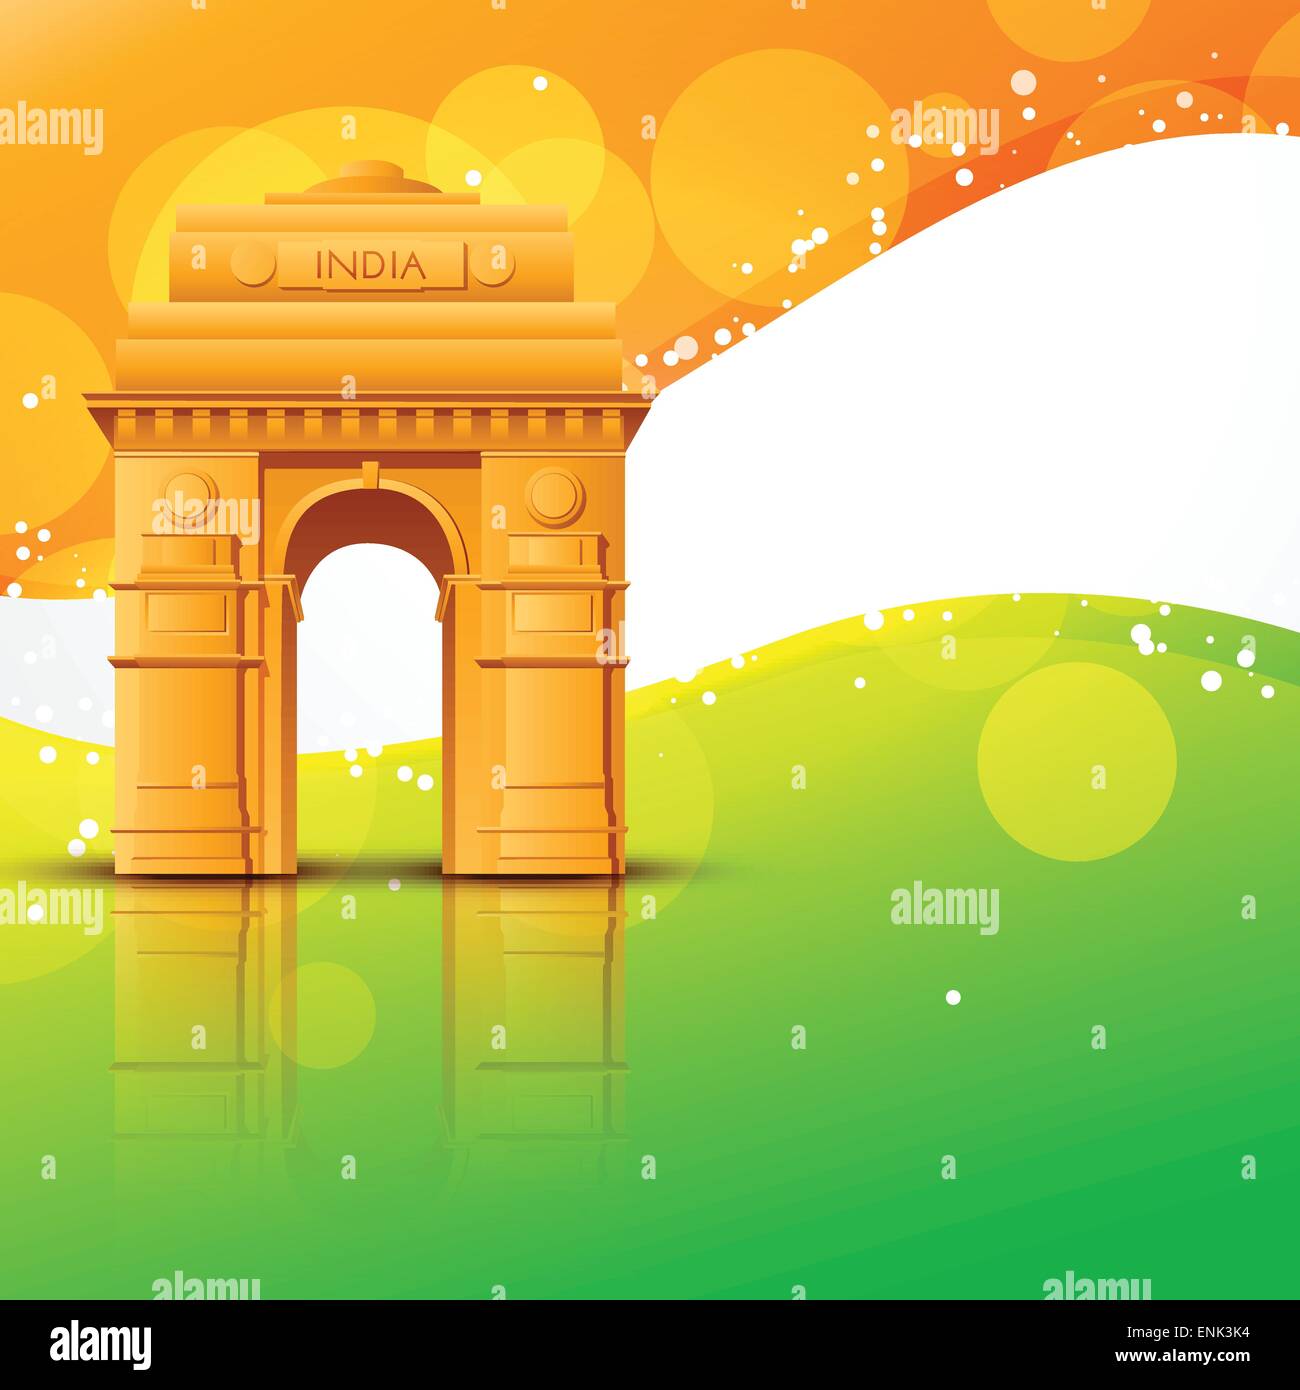 vector india gate with indian flag design Stock Vector